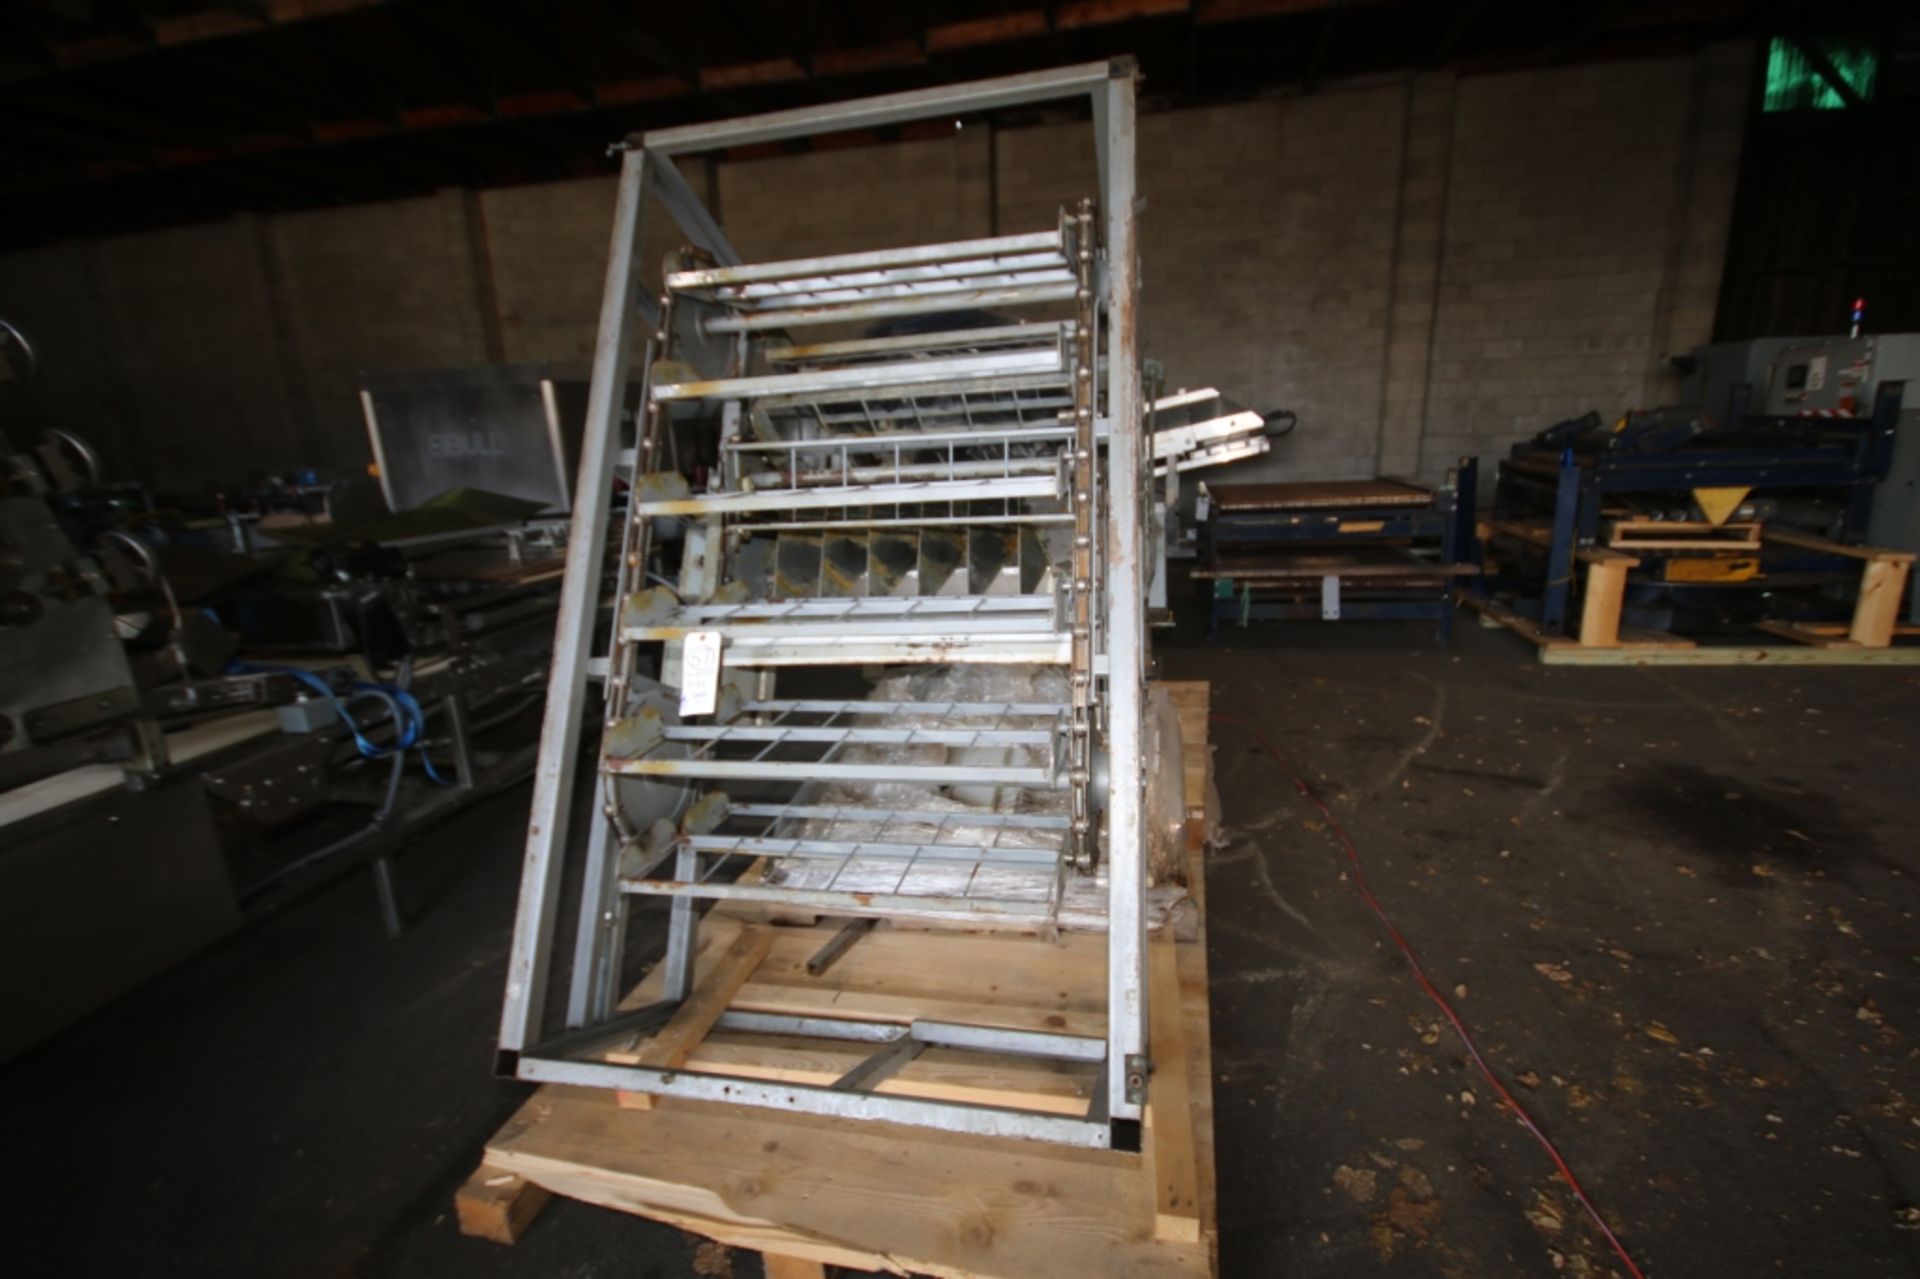 L - Shaped Conveyor Elevator,Aprox. Overall Dim. 117" H x 53" W x 80" L) (INV#69233) (Located at the - Image 2 of 4